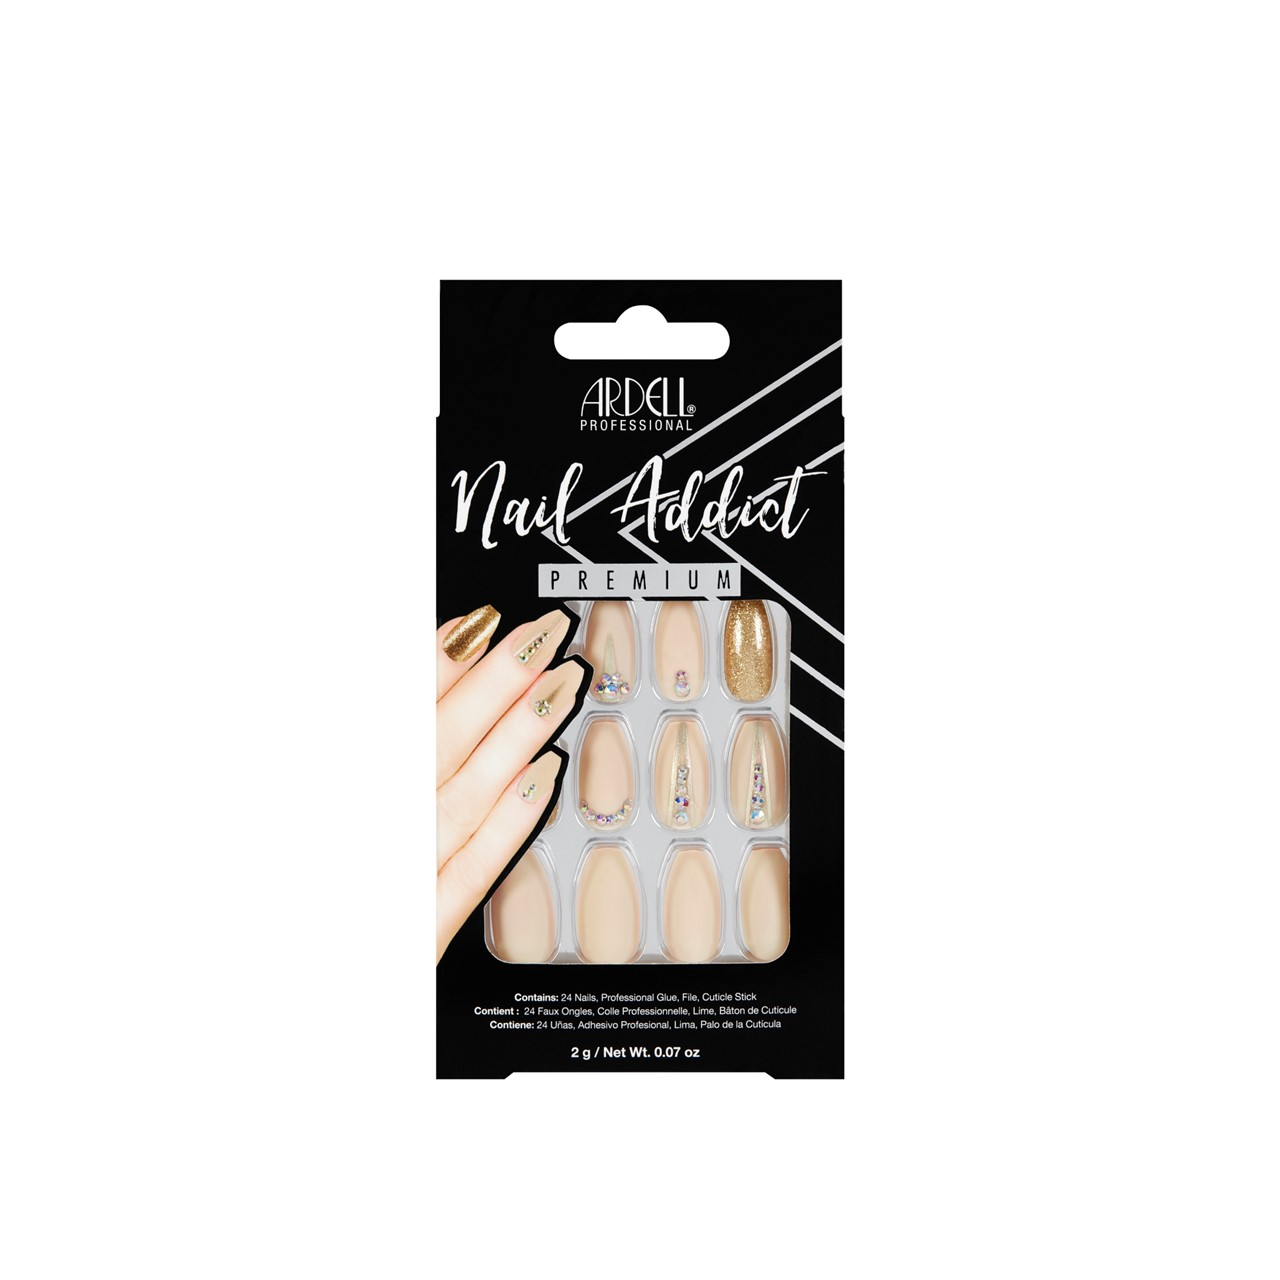 Buy ARTIFICIAL TREE Artificial Nails Set With Glue Acrylic Face Nails Set  Of 100 Pcs and Resuable Artificial Nail Glue 3gm (Pack of 1) Online at Low  Prices in India - Amazon.in